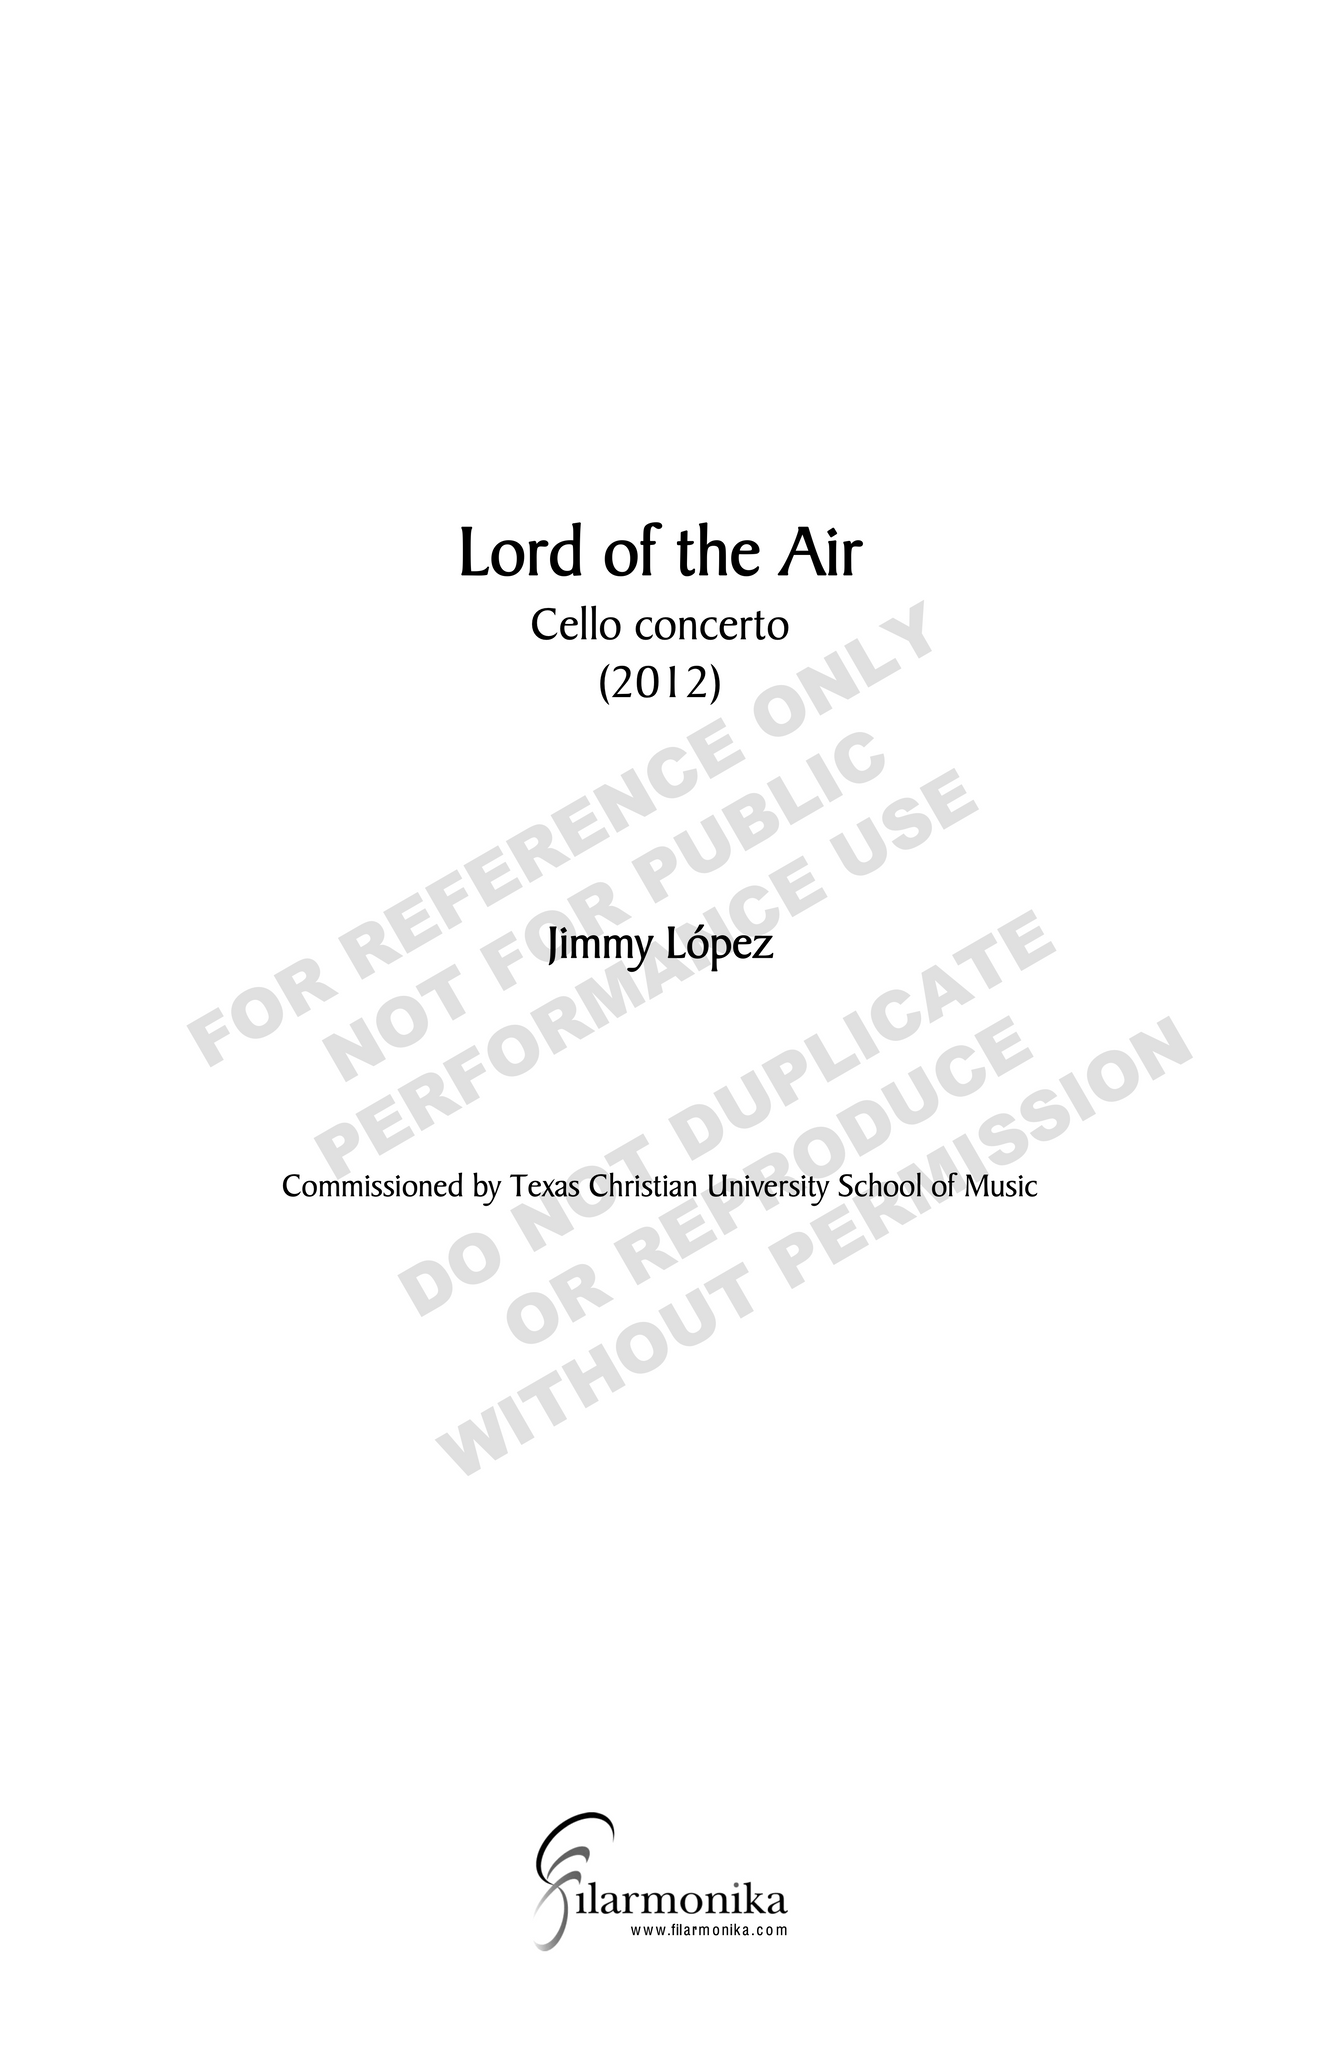 Lord of the Air, concerto for cello and orchestra